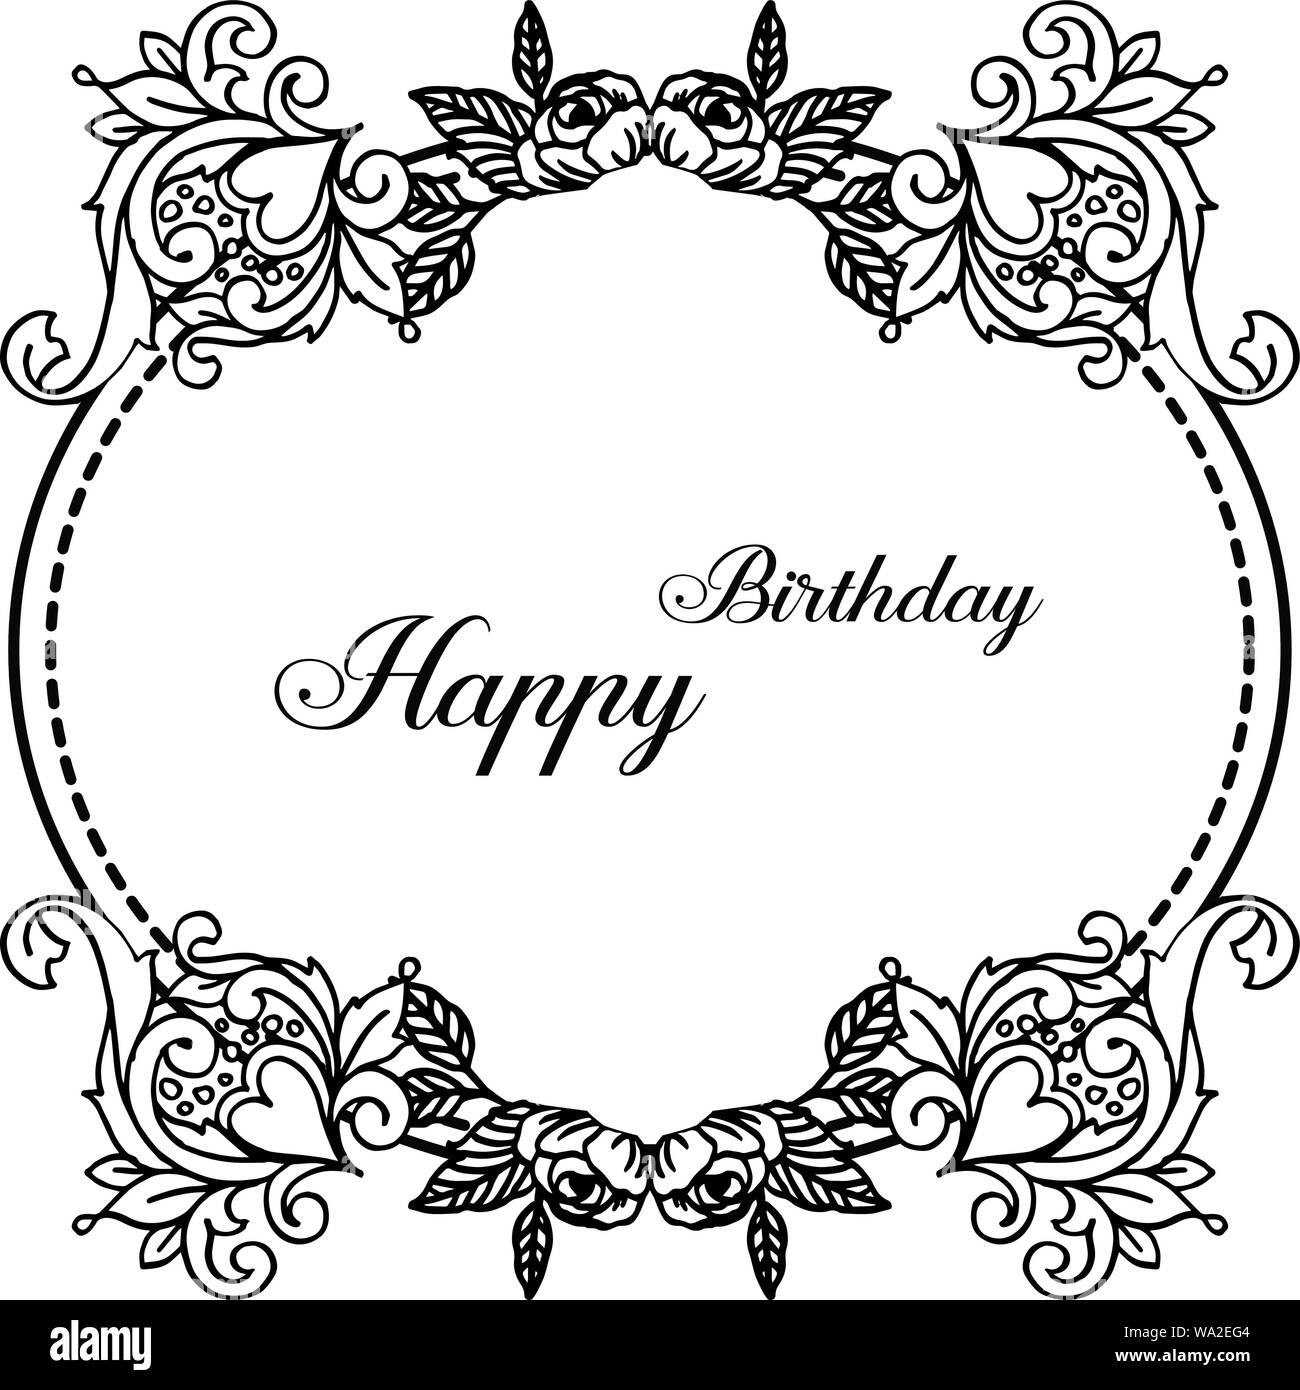 Happy birthday card Happy birthday greeting card sketch flowers frame  with watercolor spots on white background birthday  CanStock